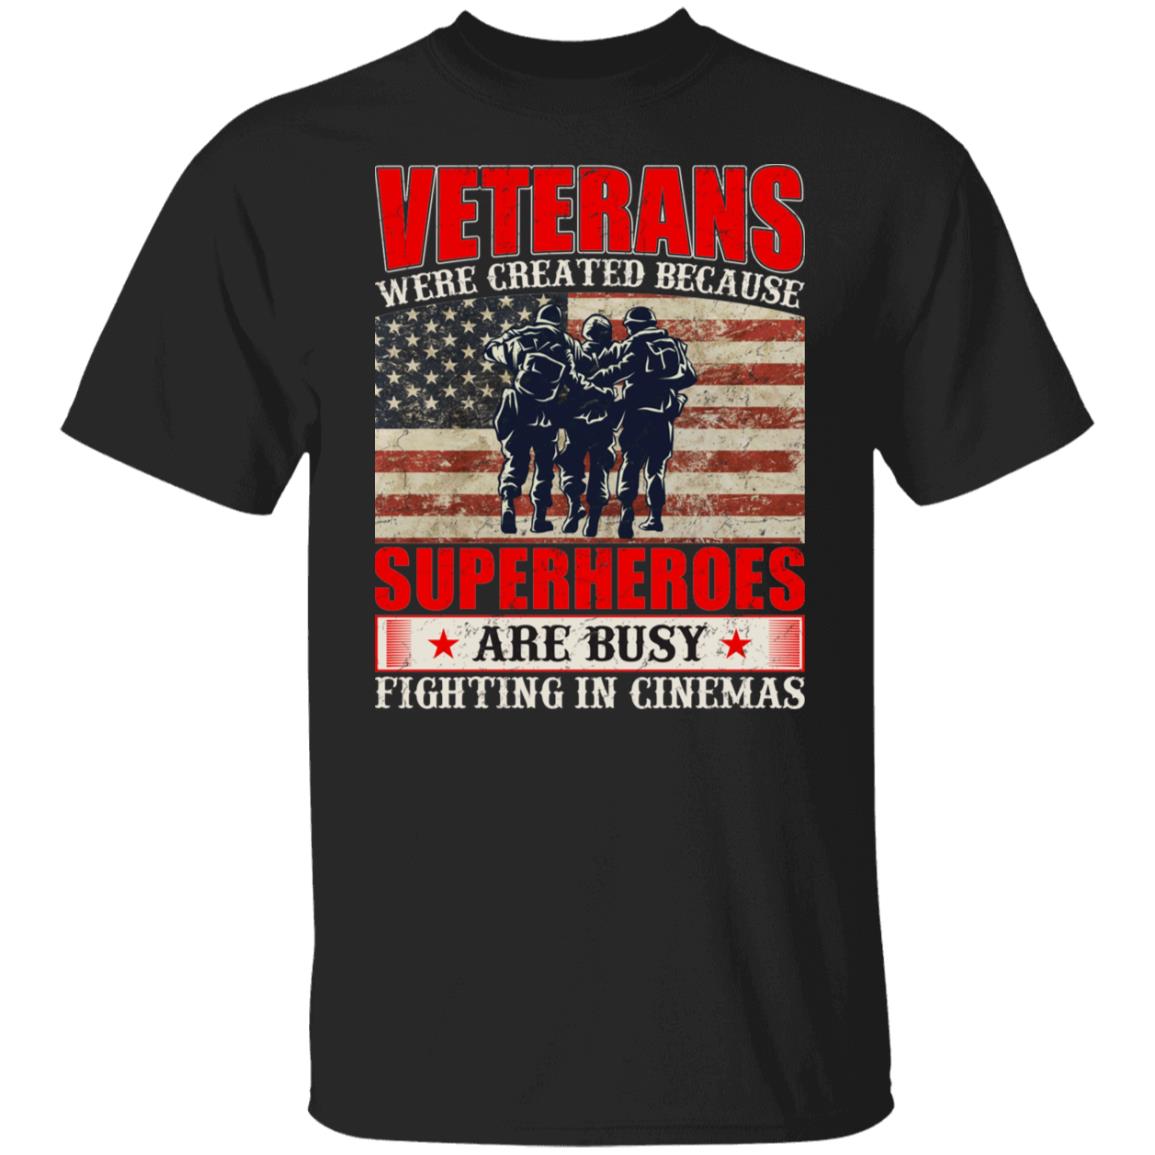 Veterans Were Created Because Superheroes are Busy Fighting in Cinemas Shirt